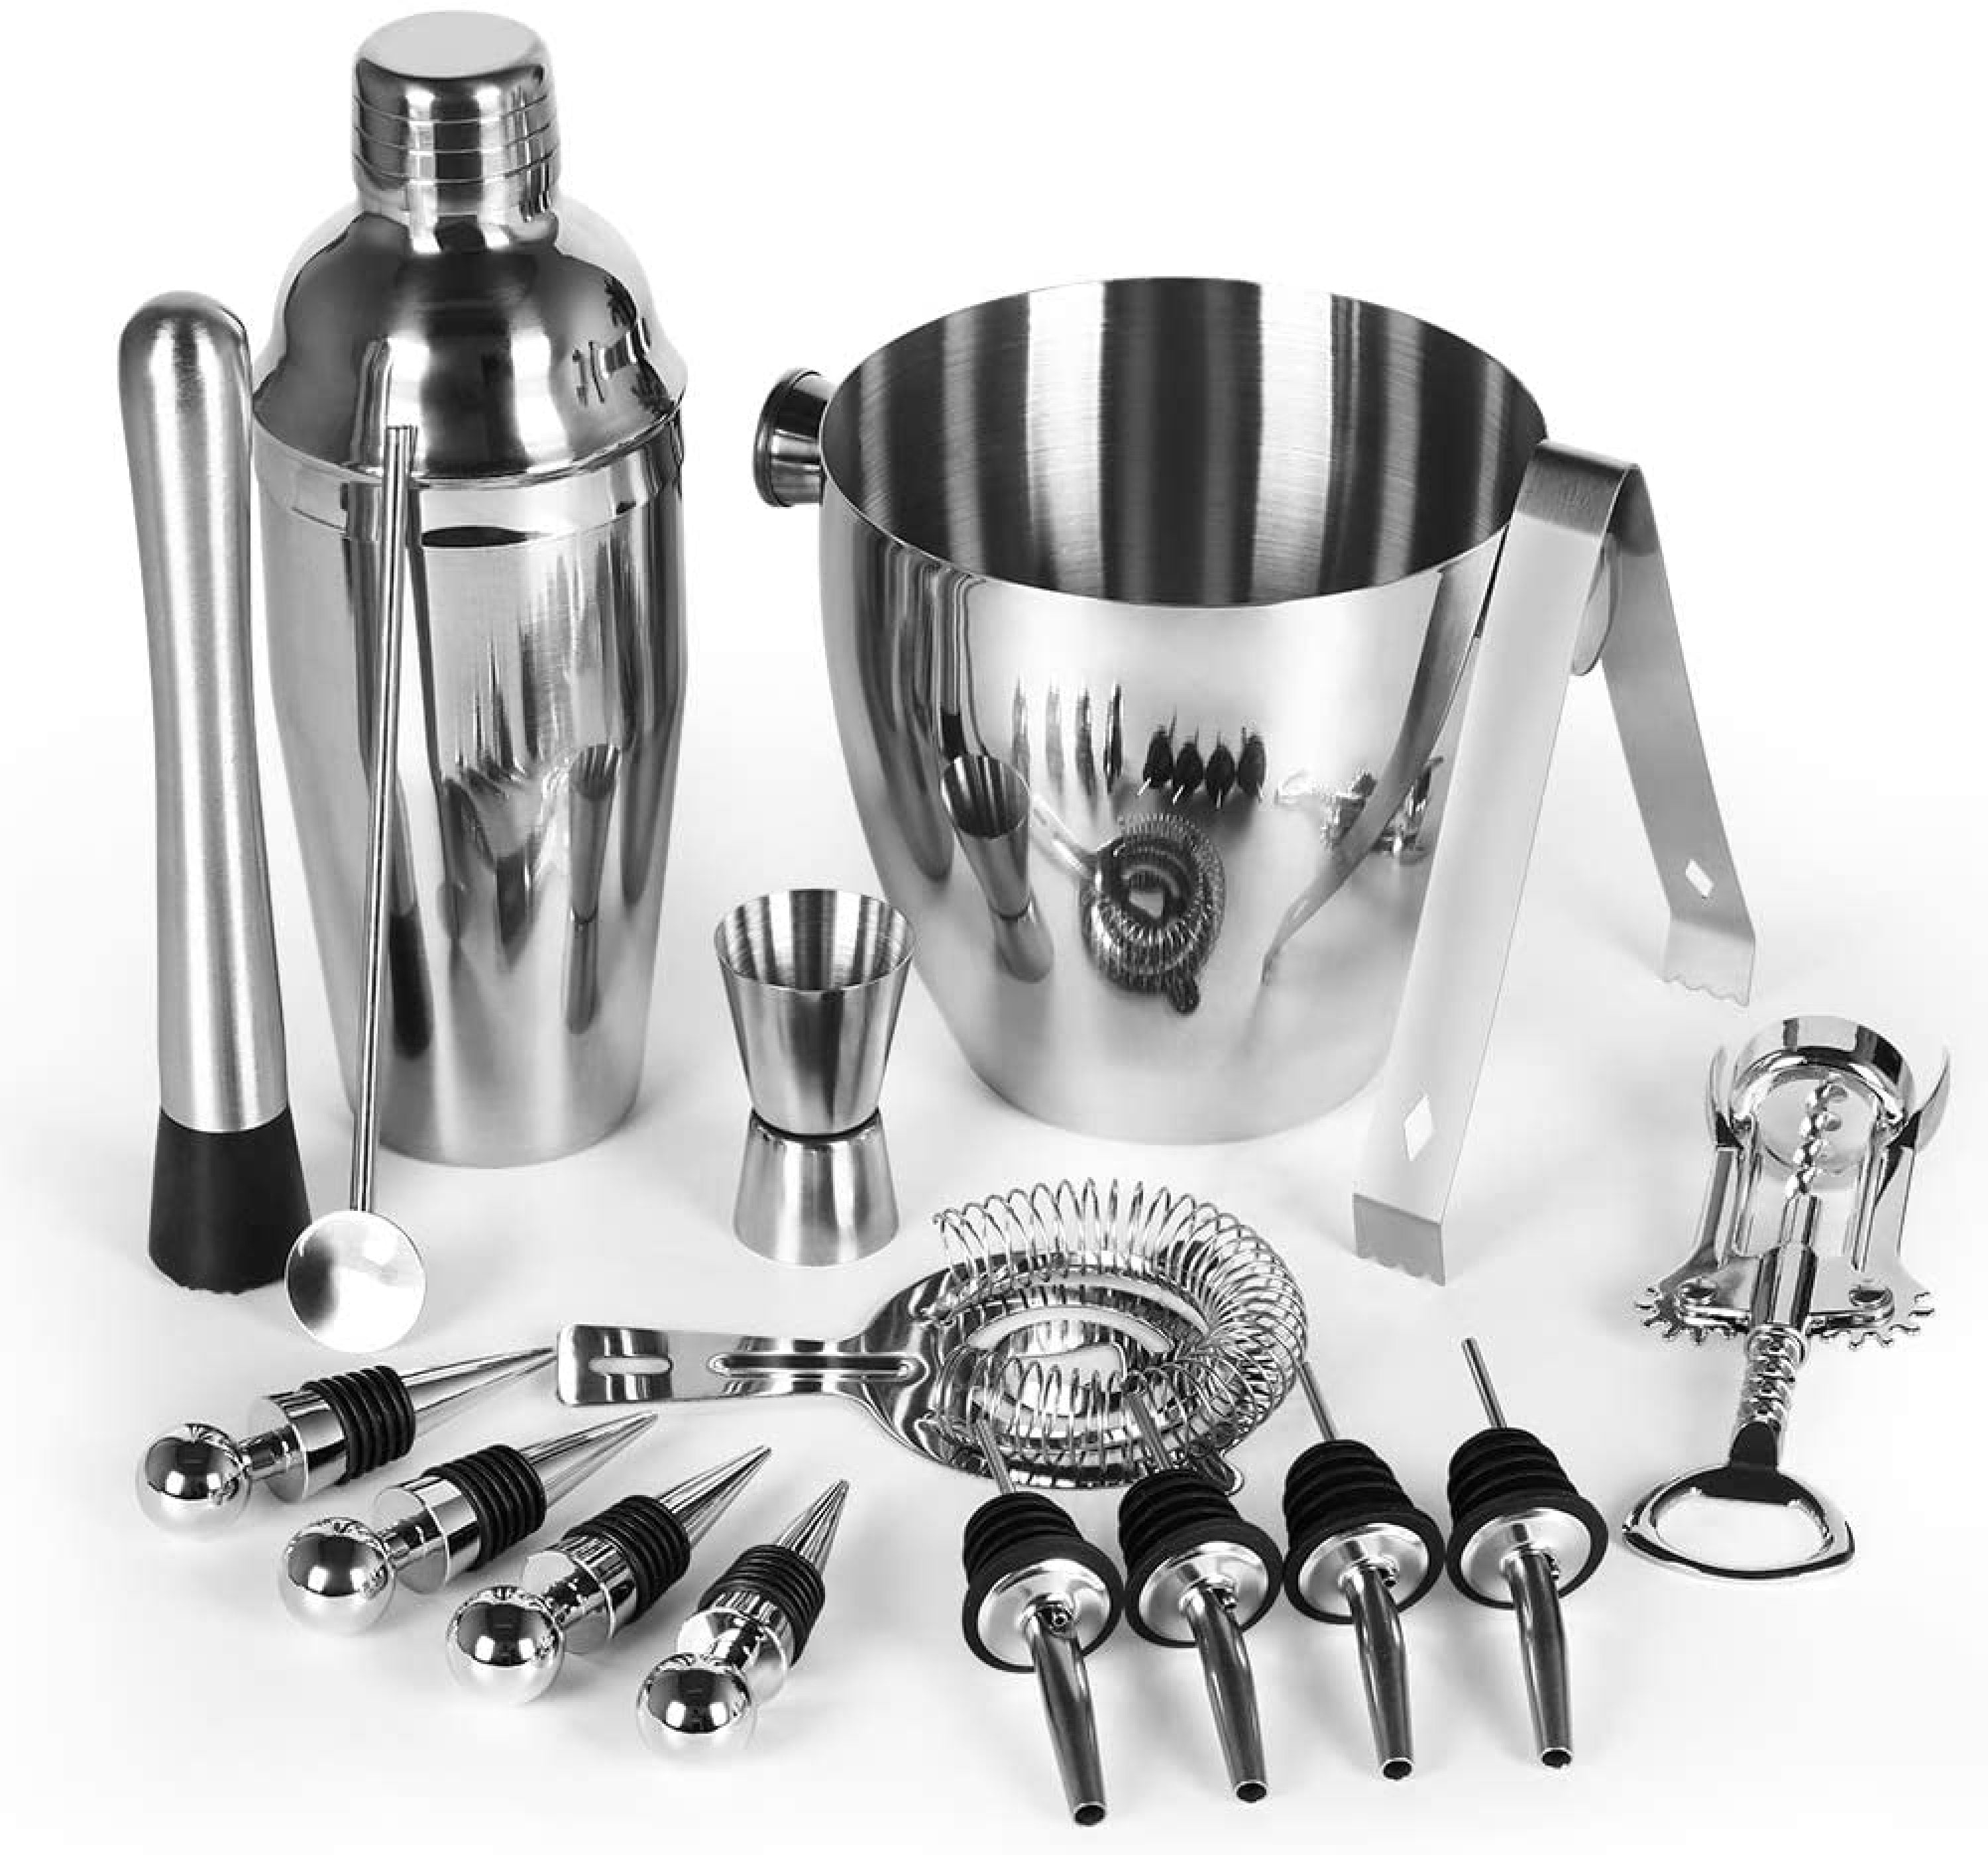 Muddler Double Jigger Oggi 6 Piece Bartender Accessories Set-Includes Stir-Stick Stainless 9017.0 Ice Strainer and Tongs Peeler 